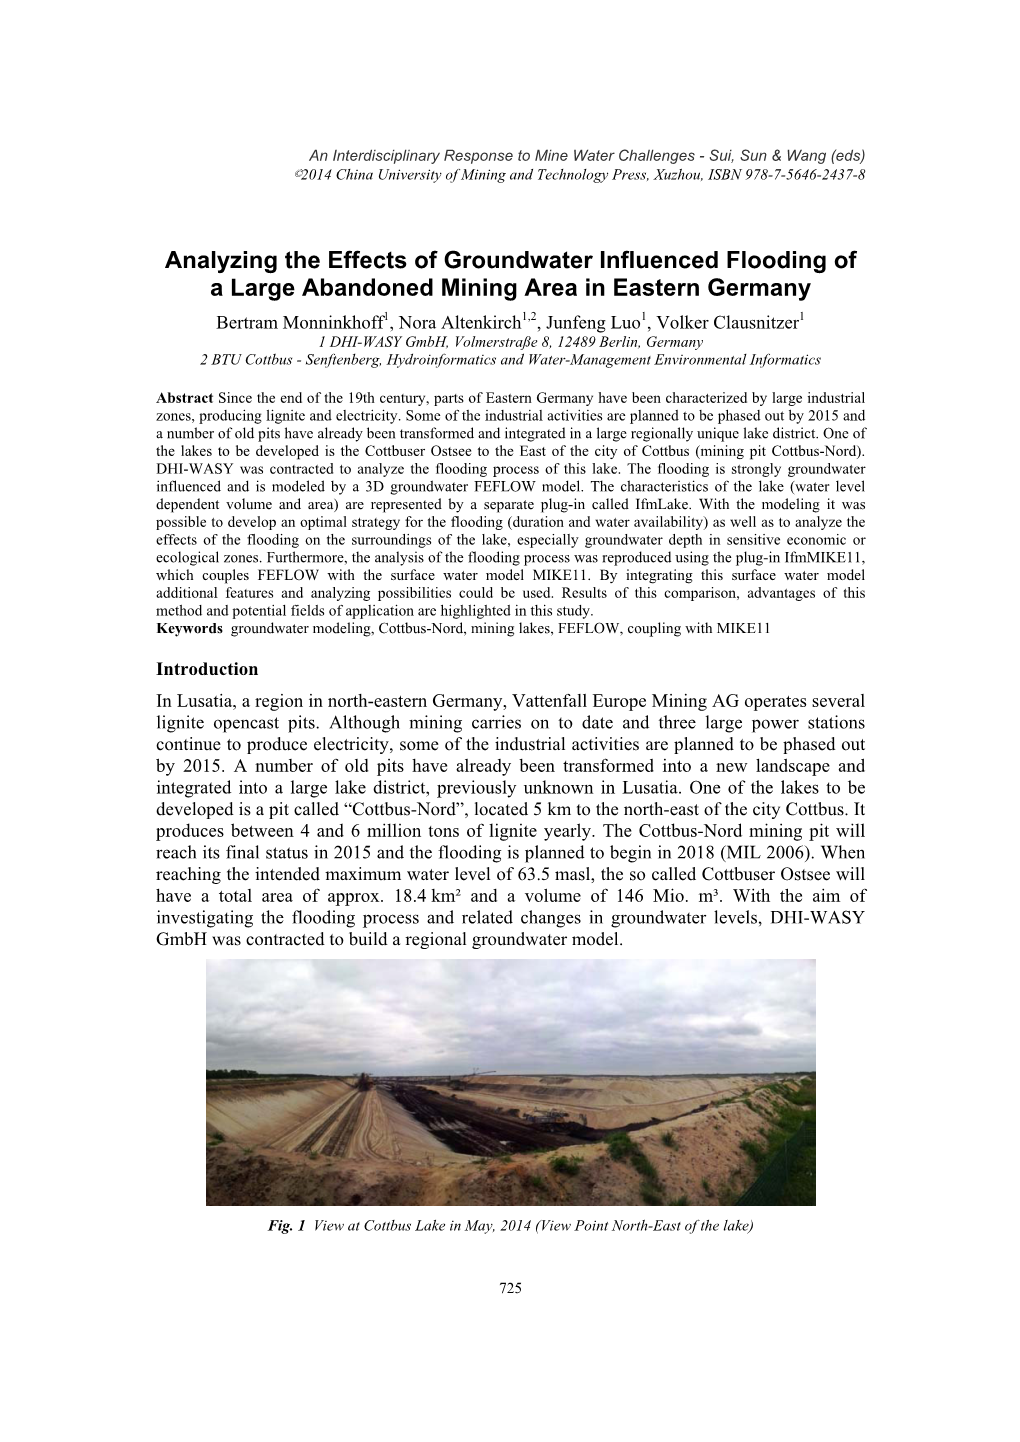 Analyzing the Effects of Groundwater Influenced Flooding of a Large Abandoned Mining Area in Eastern Germany